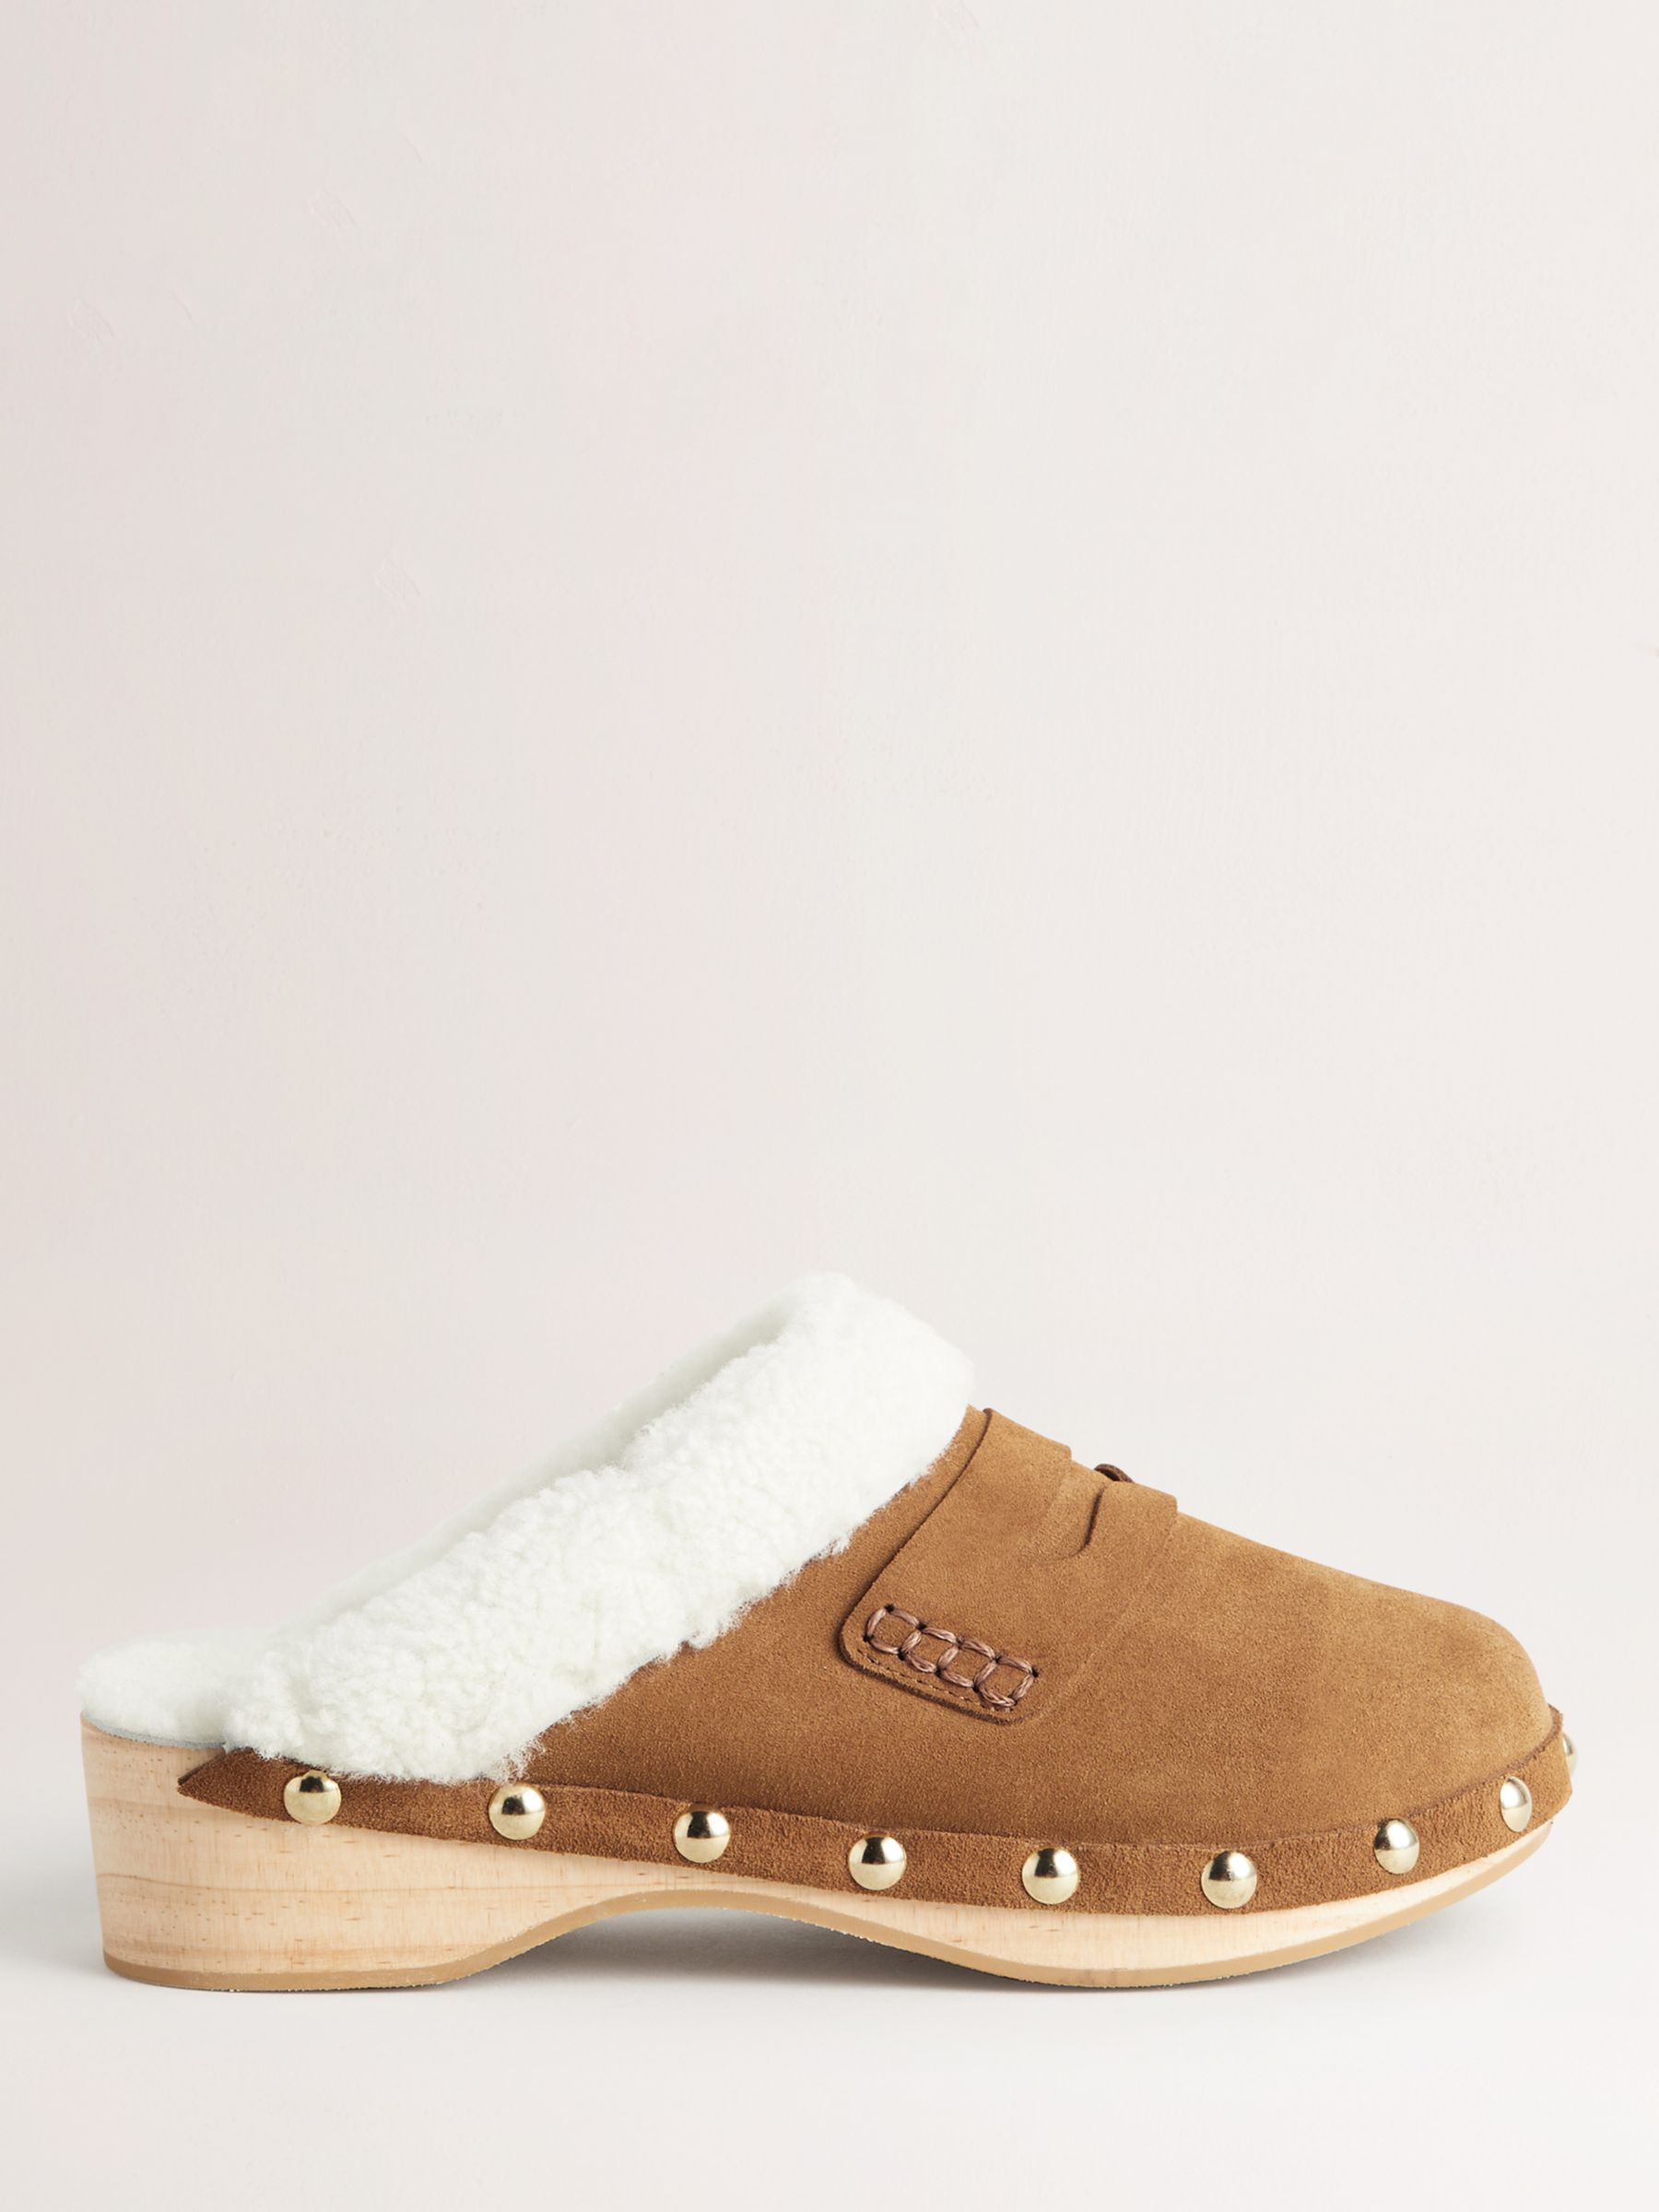 Boden Shearling Lined Clog Shoes, Golden Brown